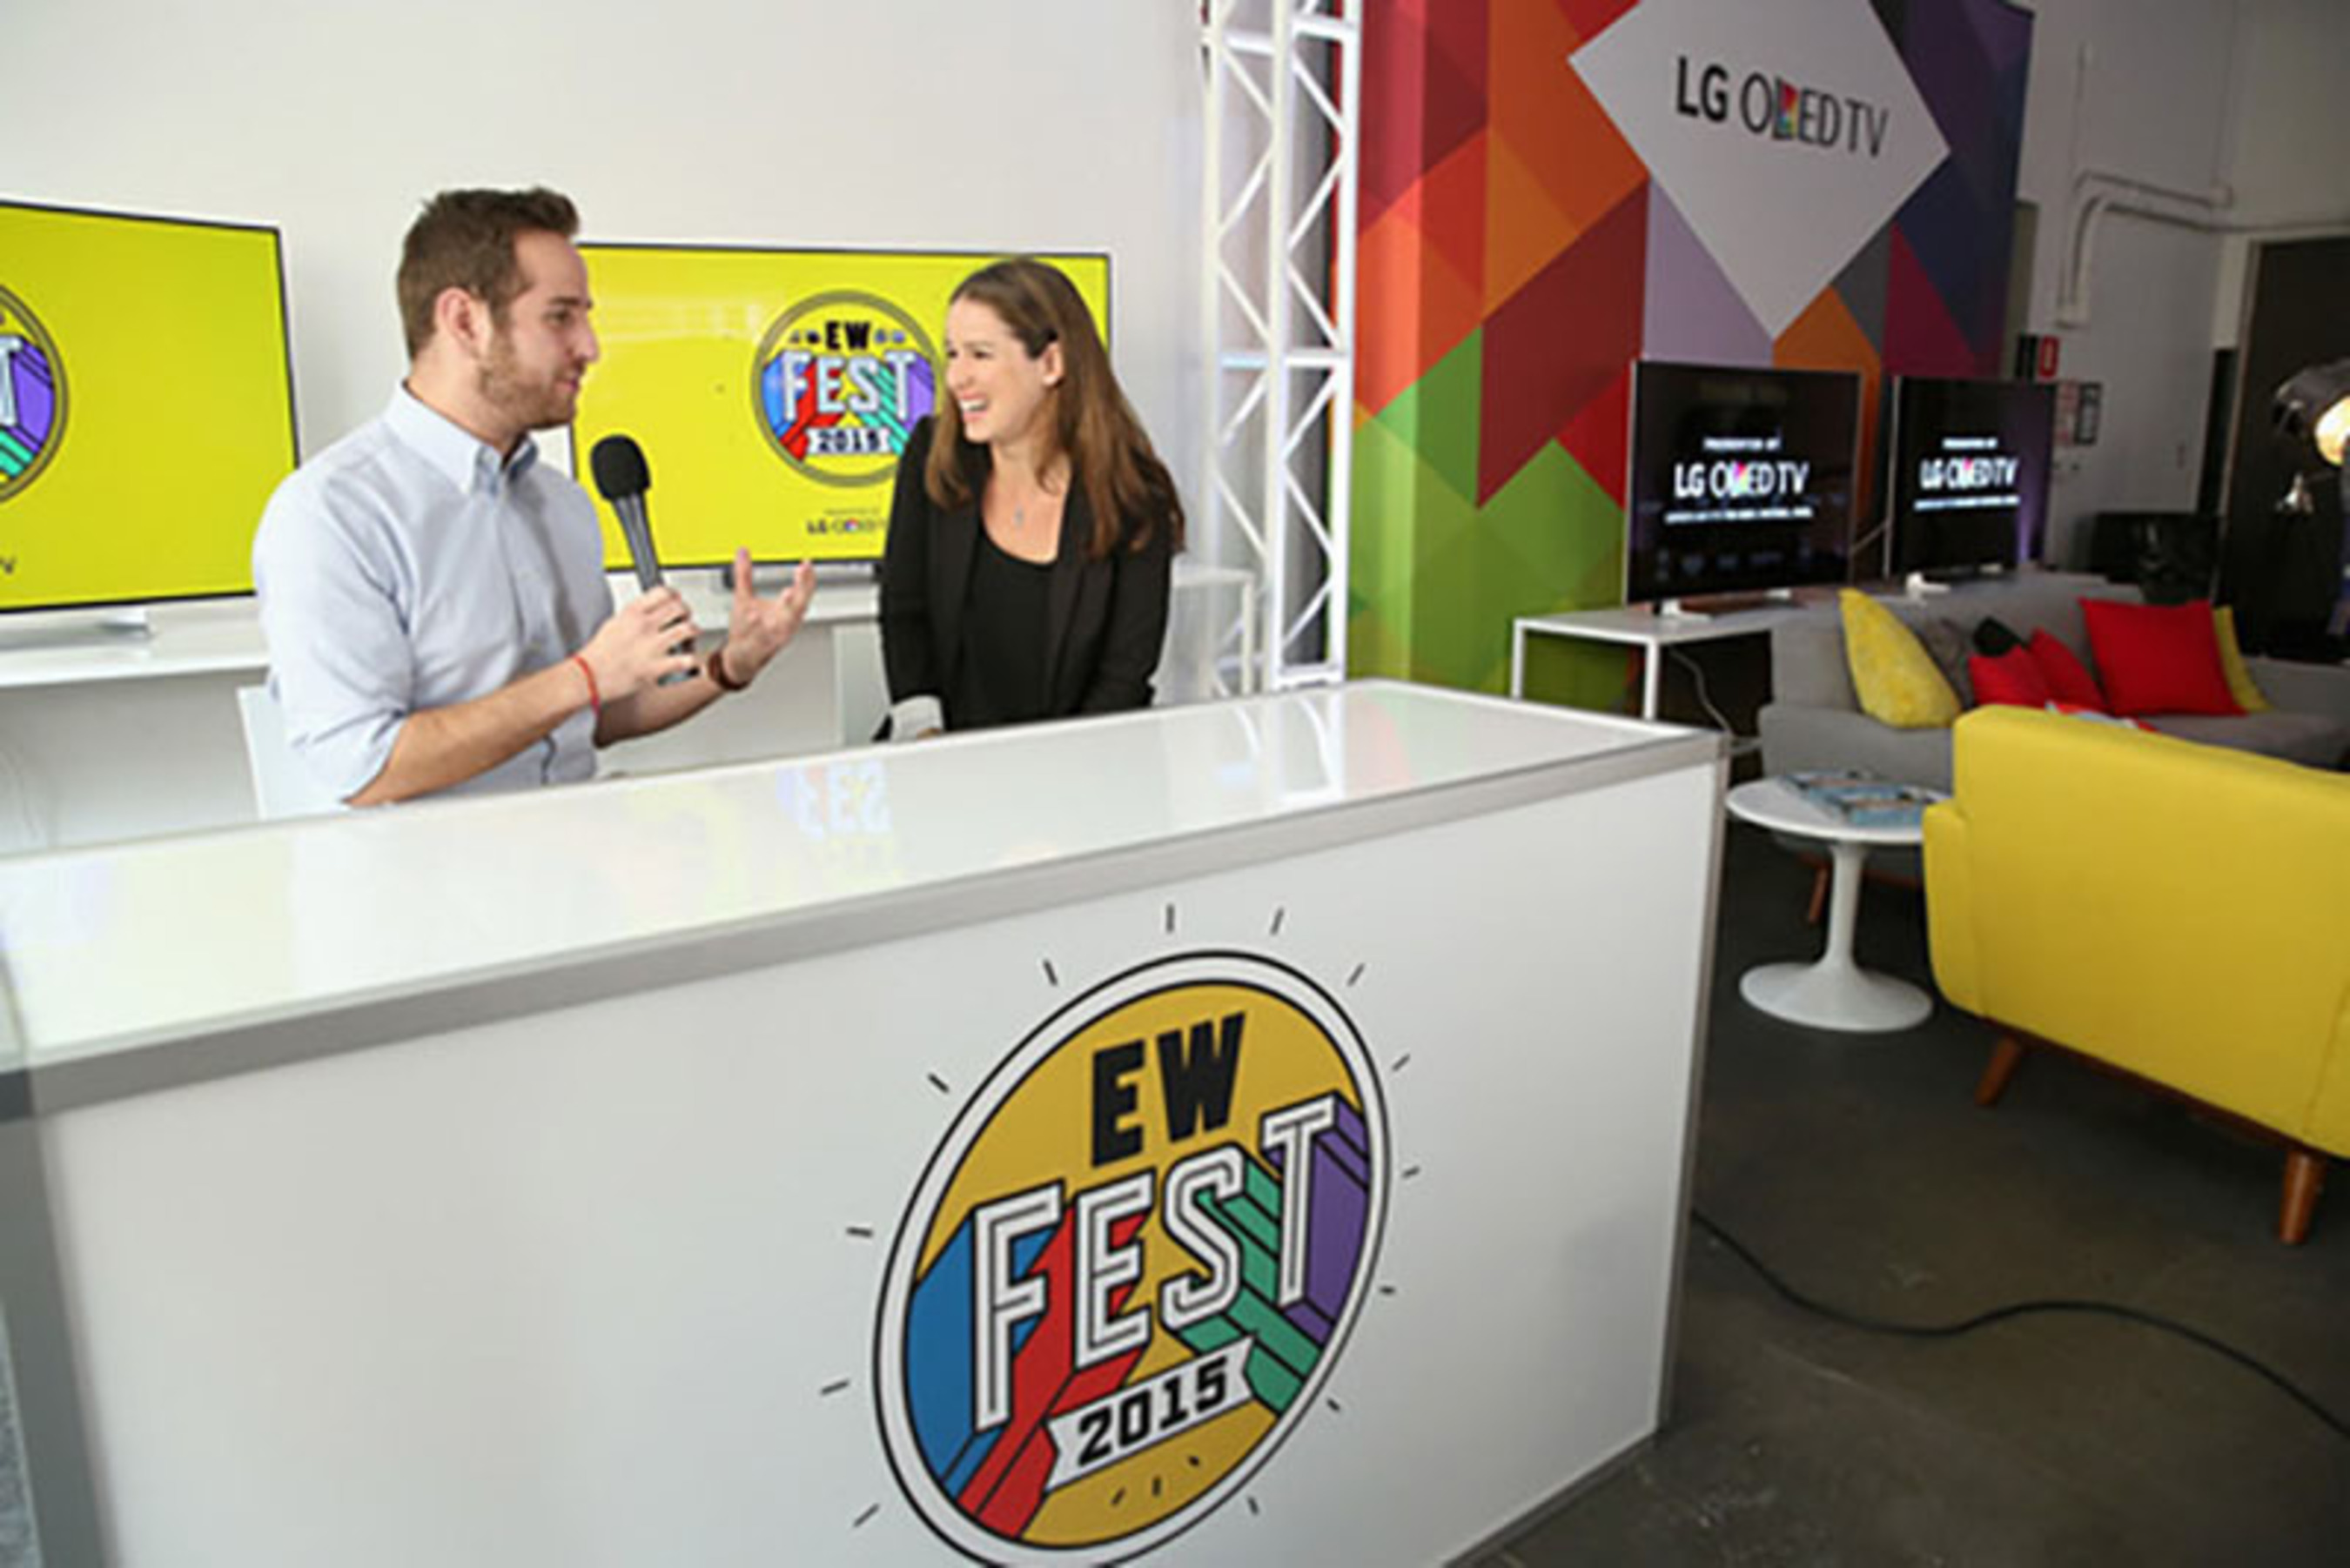 Marc Snetiker (L) and Chilina Kennedy speak during Entertainment Weekly's first ever "EW Fest" presented by LG OLED TV on October 24, 2015 in New York City. (Photo by Monica Schipper/Getty Images for Entertainment Weekly)